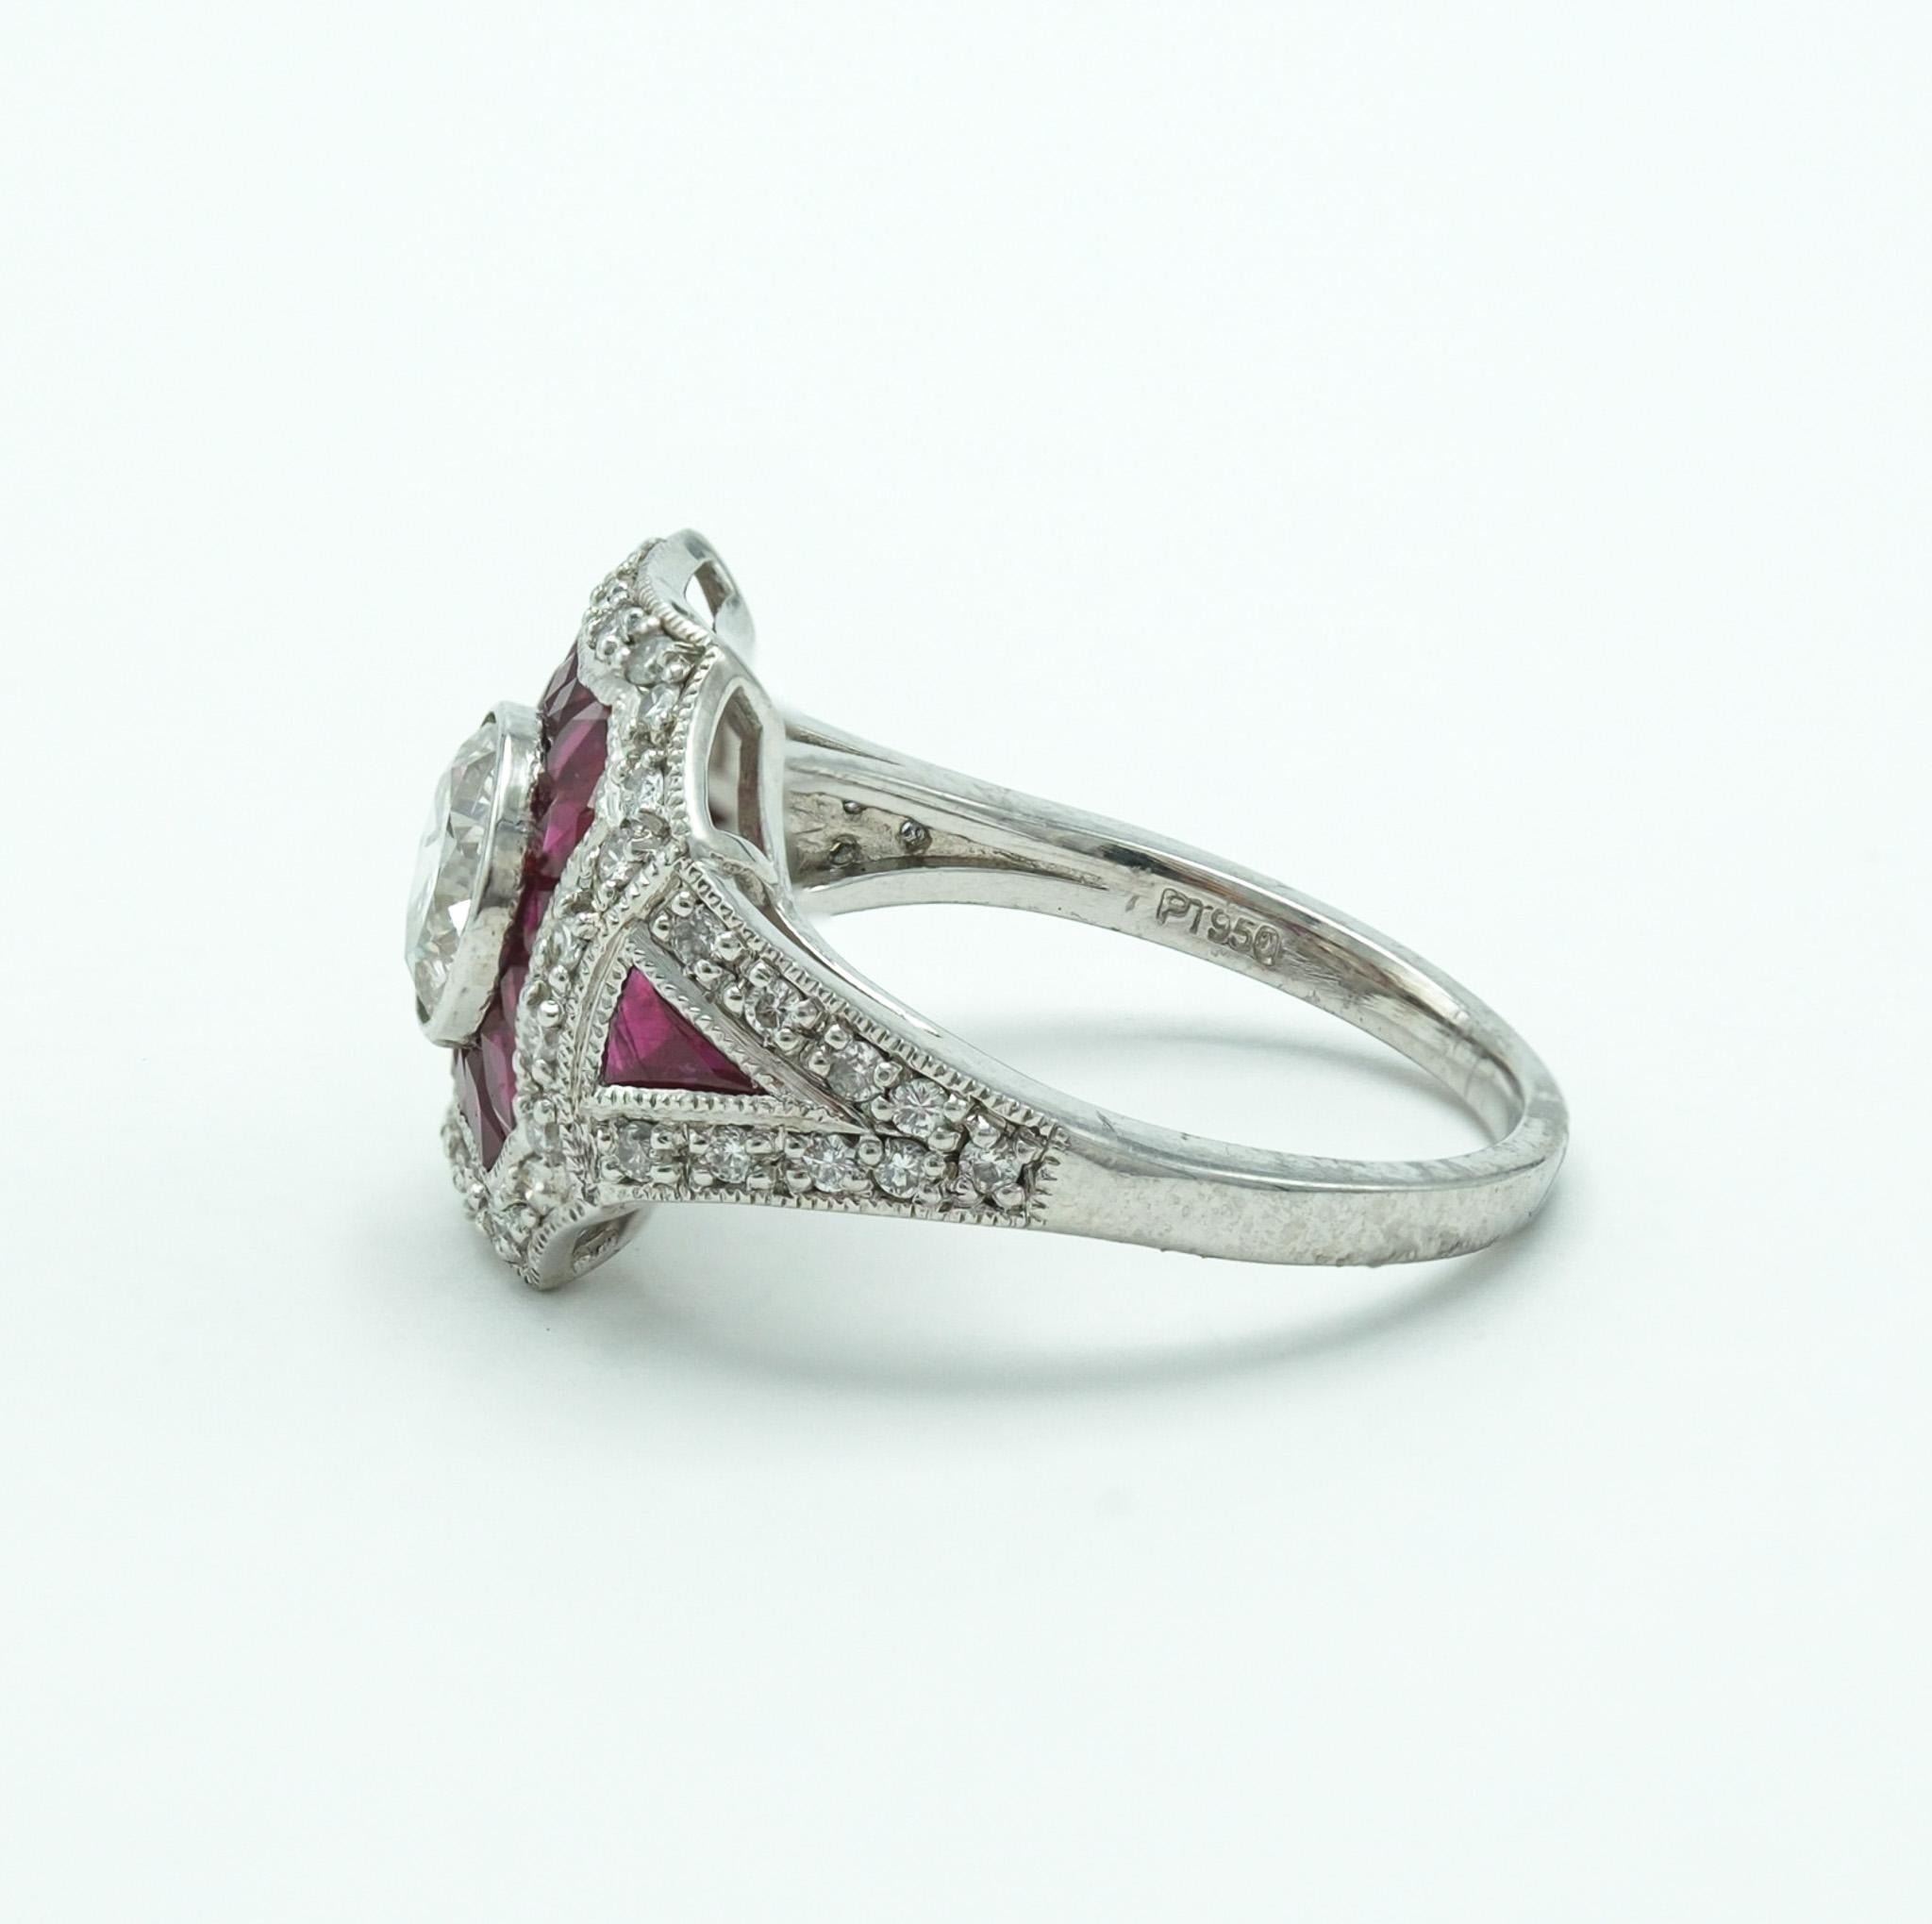 This platinum ring masterfully showcases  a 0.9 carat round diamond, encased by 16 baguette cut rubies - showcasing a deep red and pink hue. Surrounding them is an outer halo of diamonds, with a combined diamond weight of 1.25 carats. Two triangle